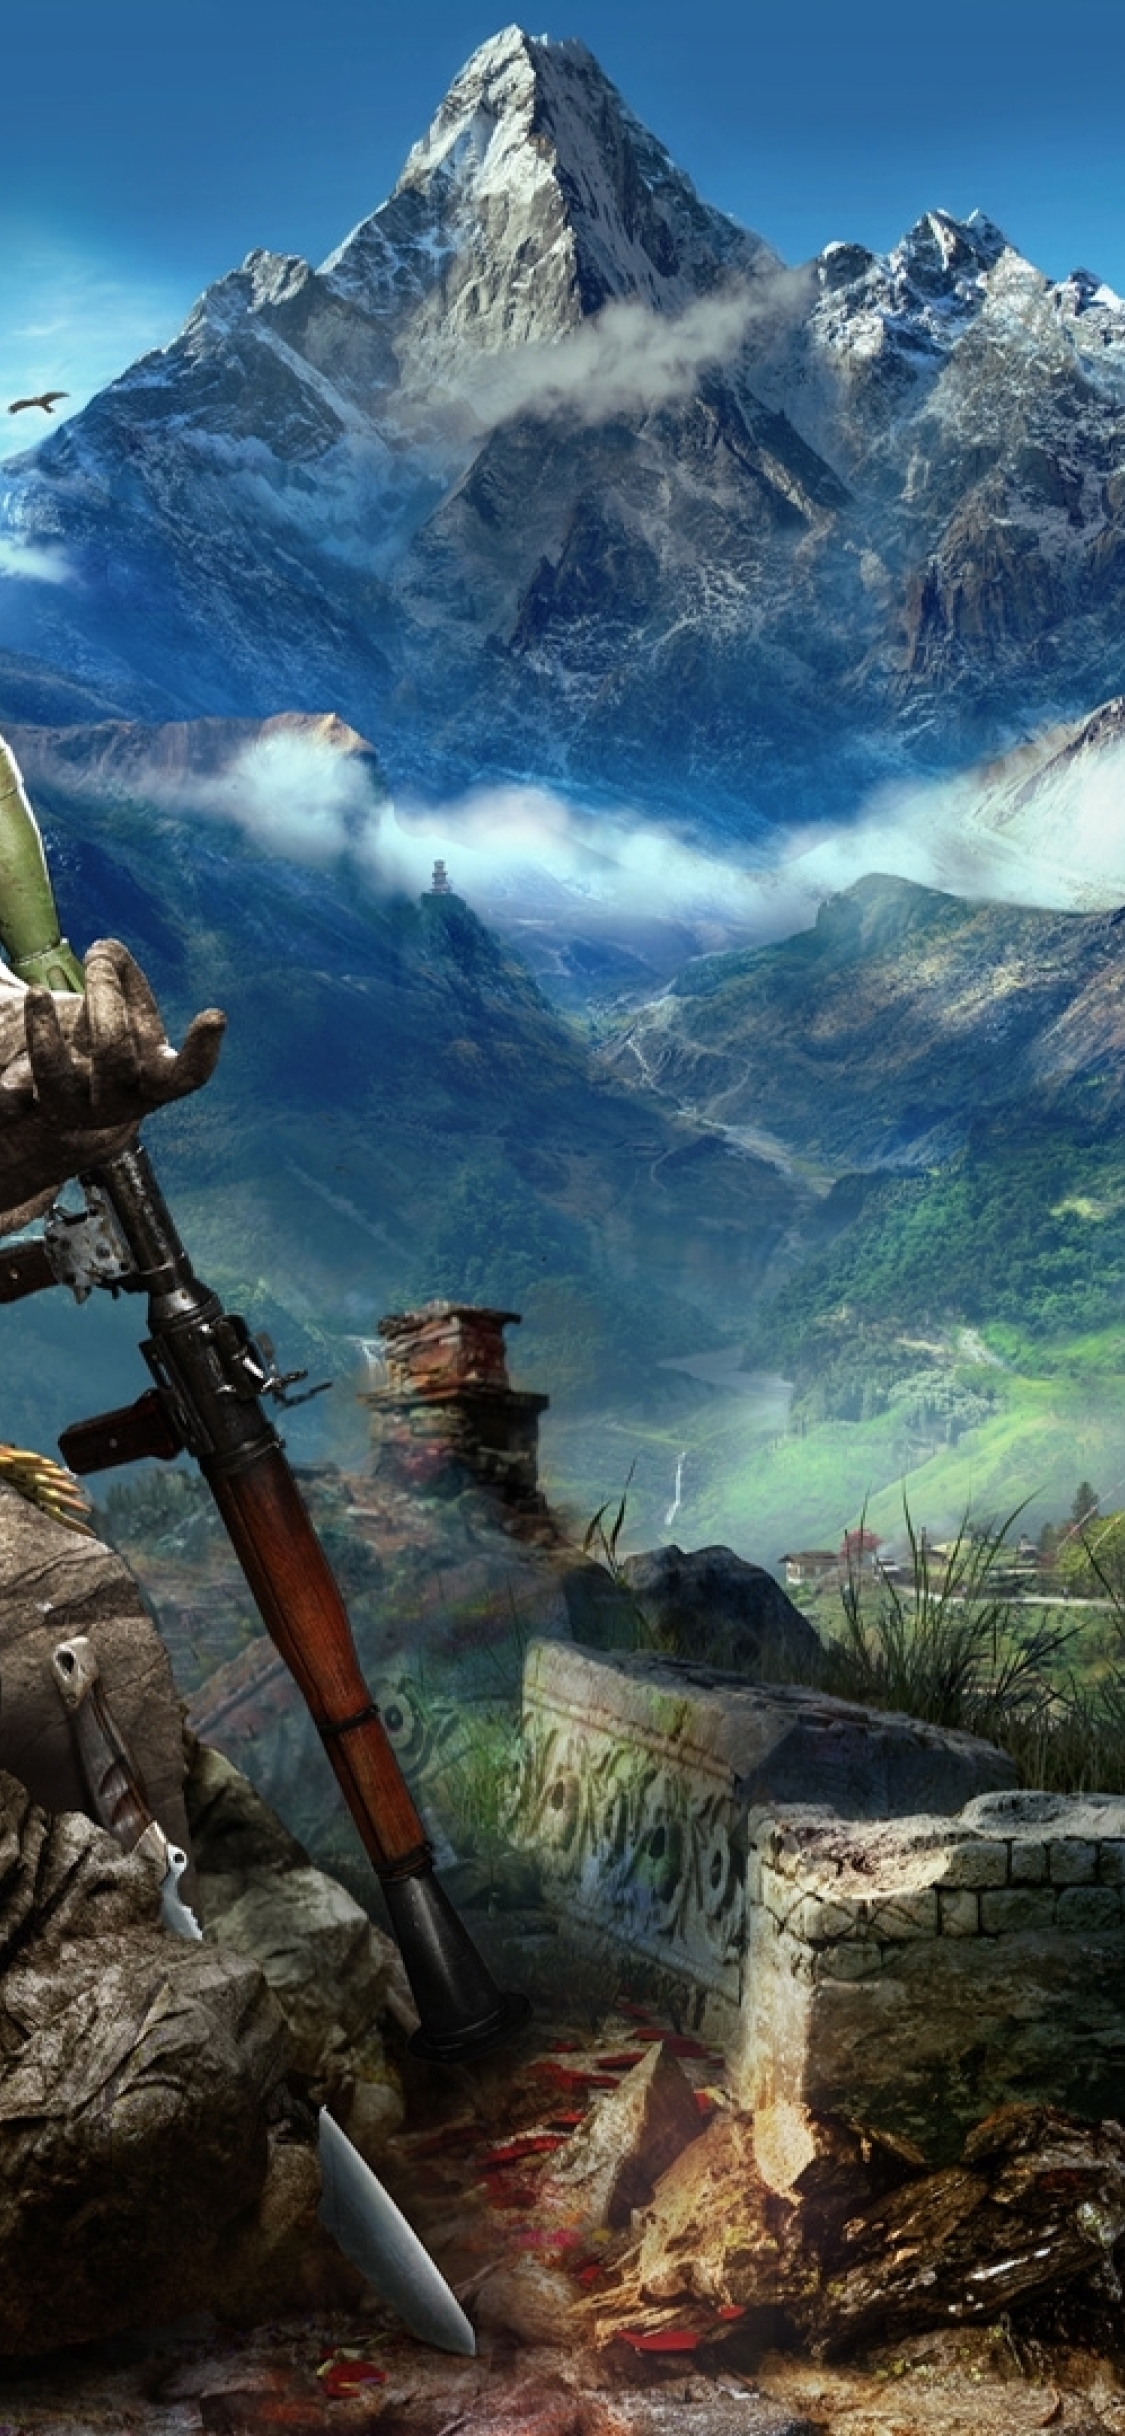 download far cry 4 for android